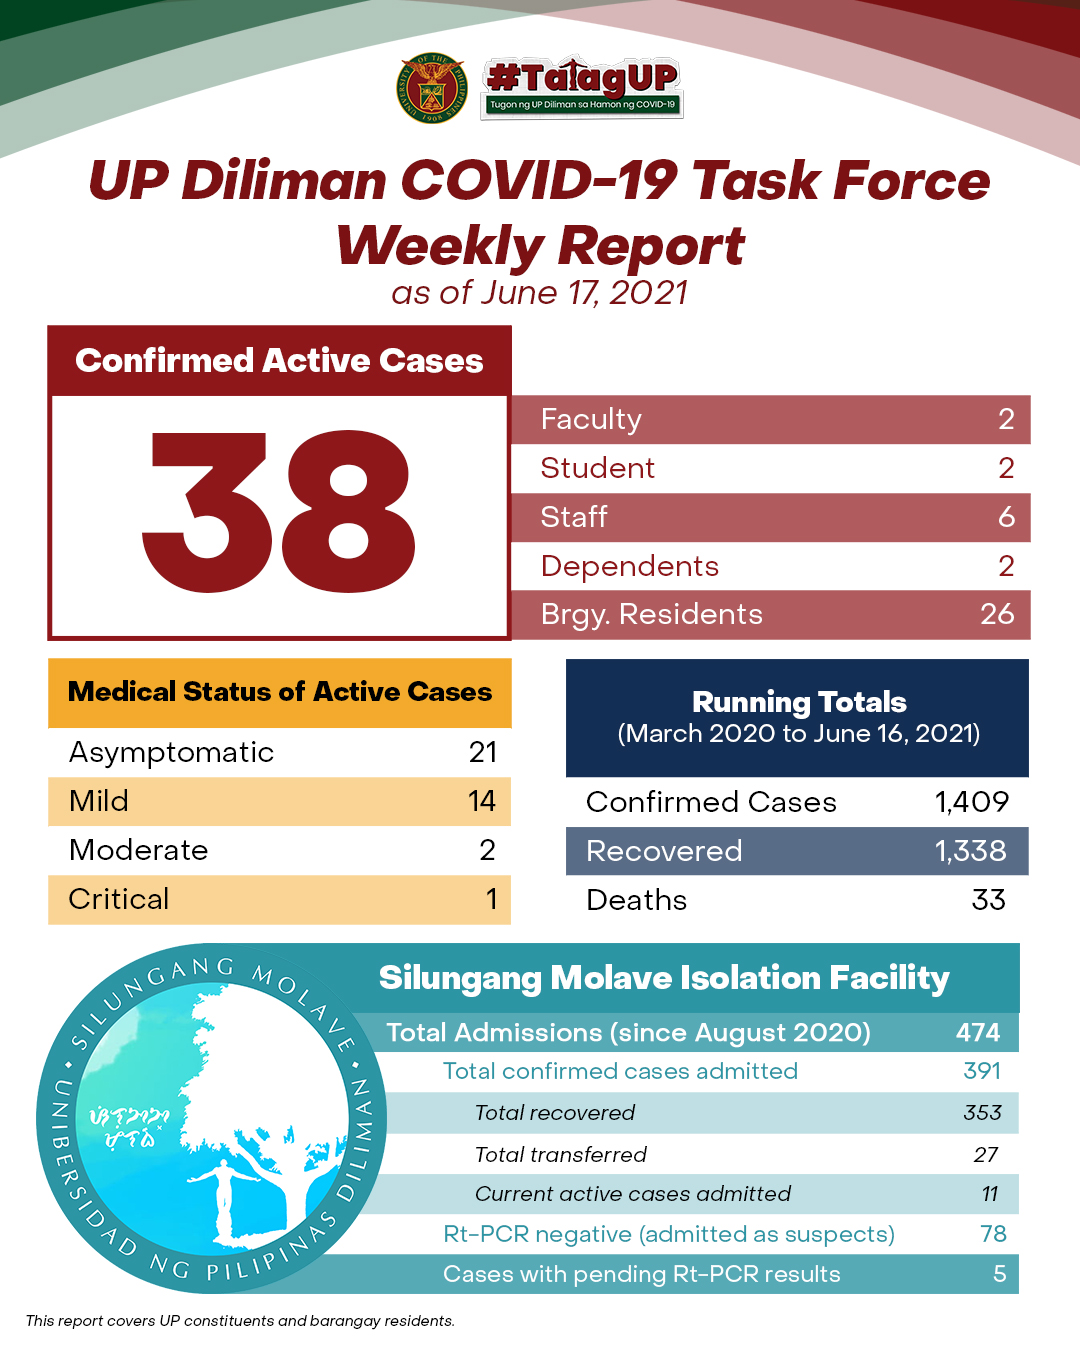 UP Diliman COVID-19 Task Force Weekly Report as of June 17, 2021